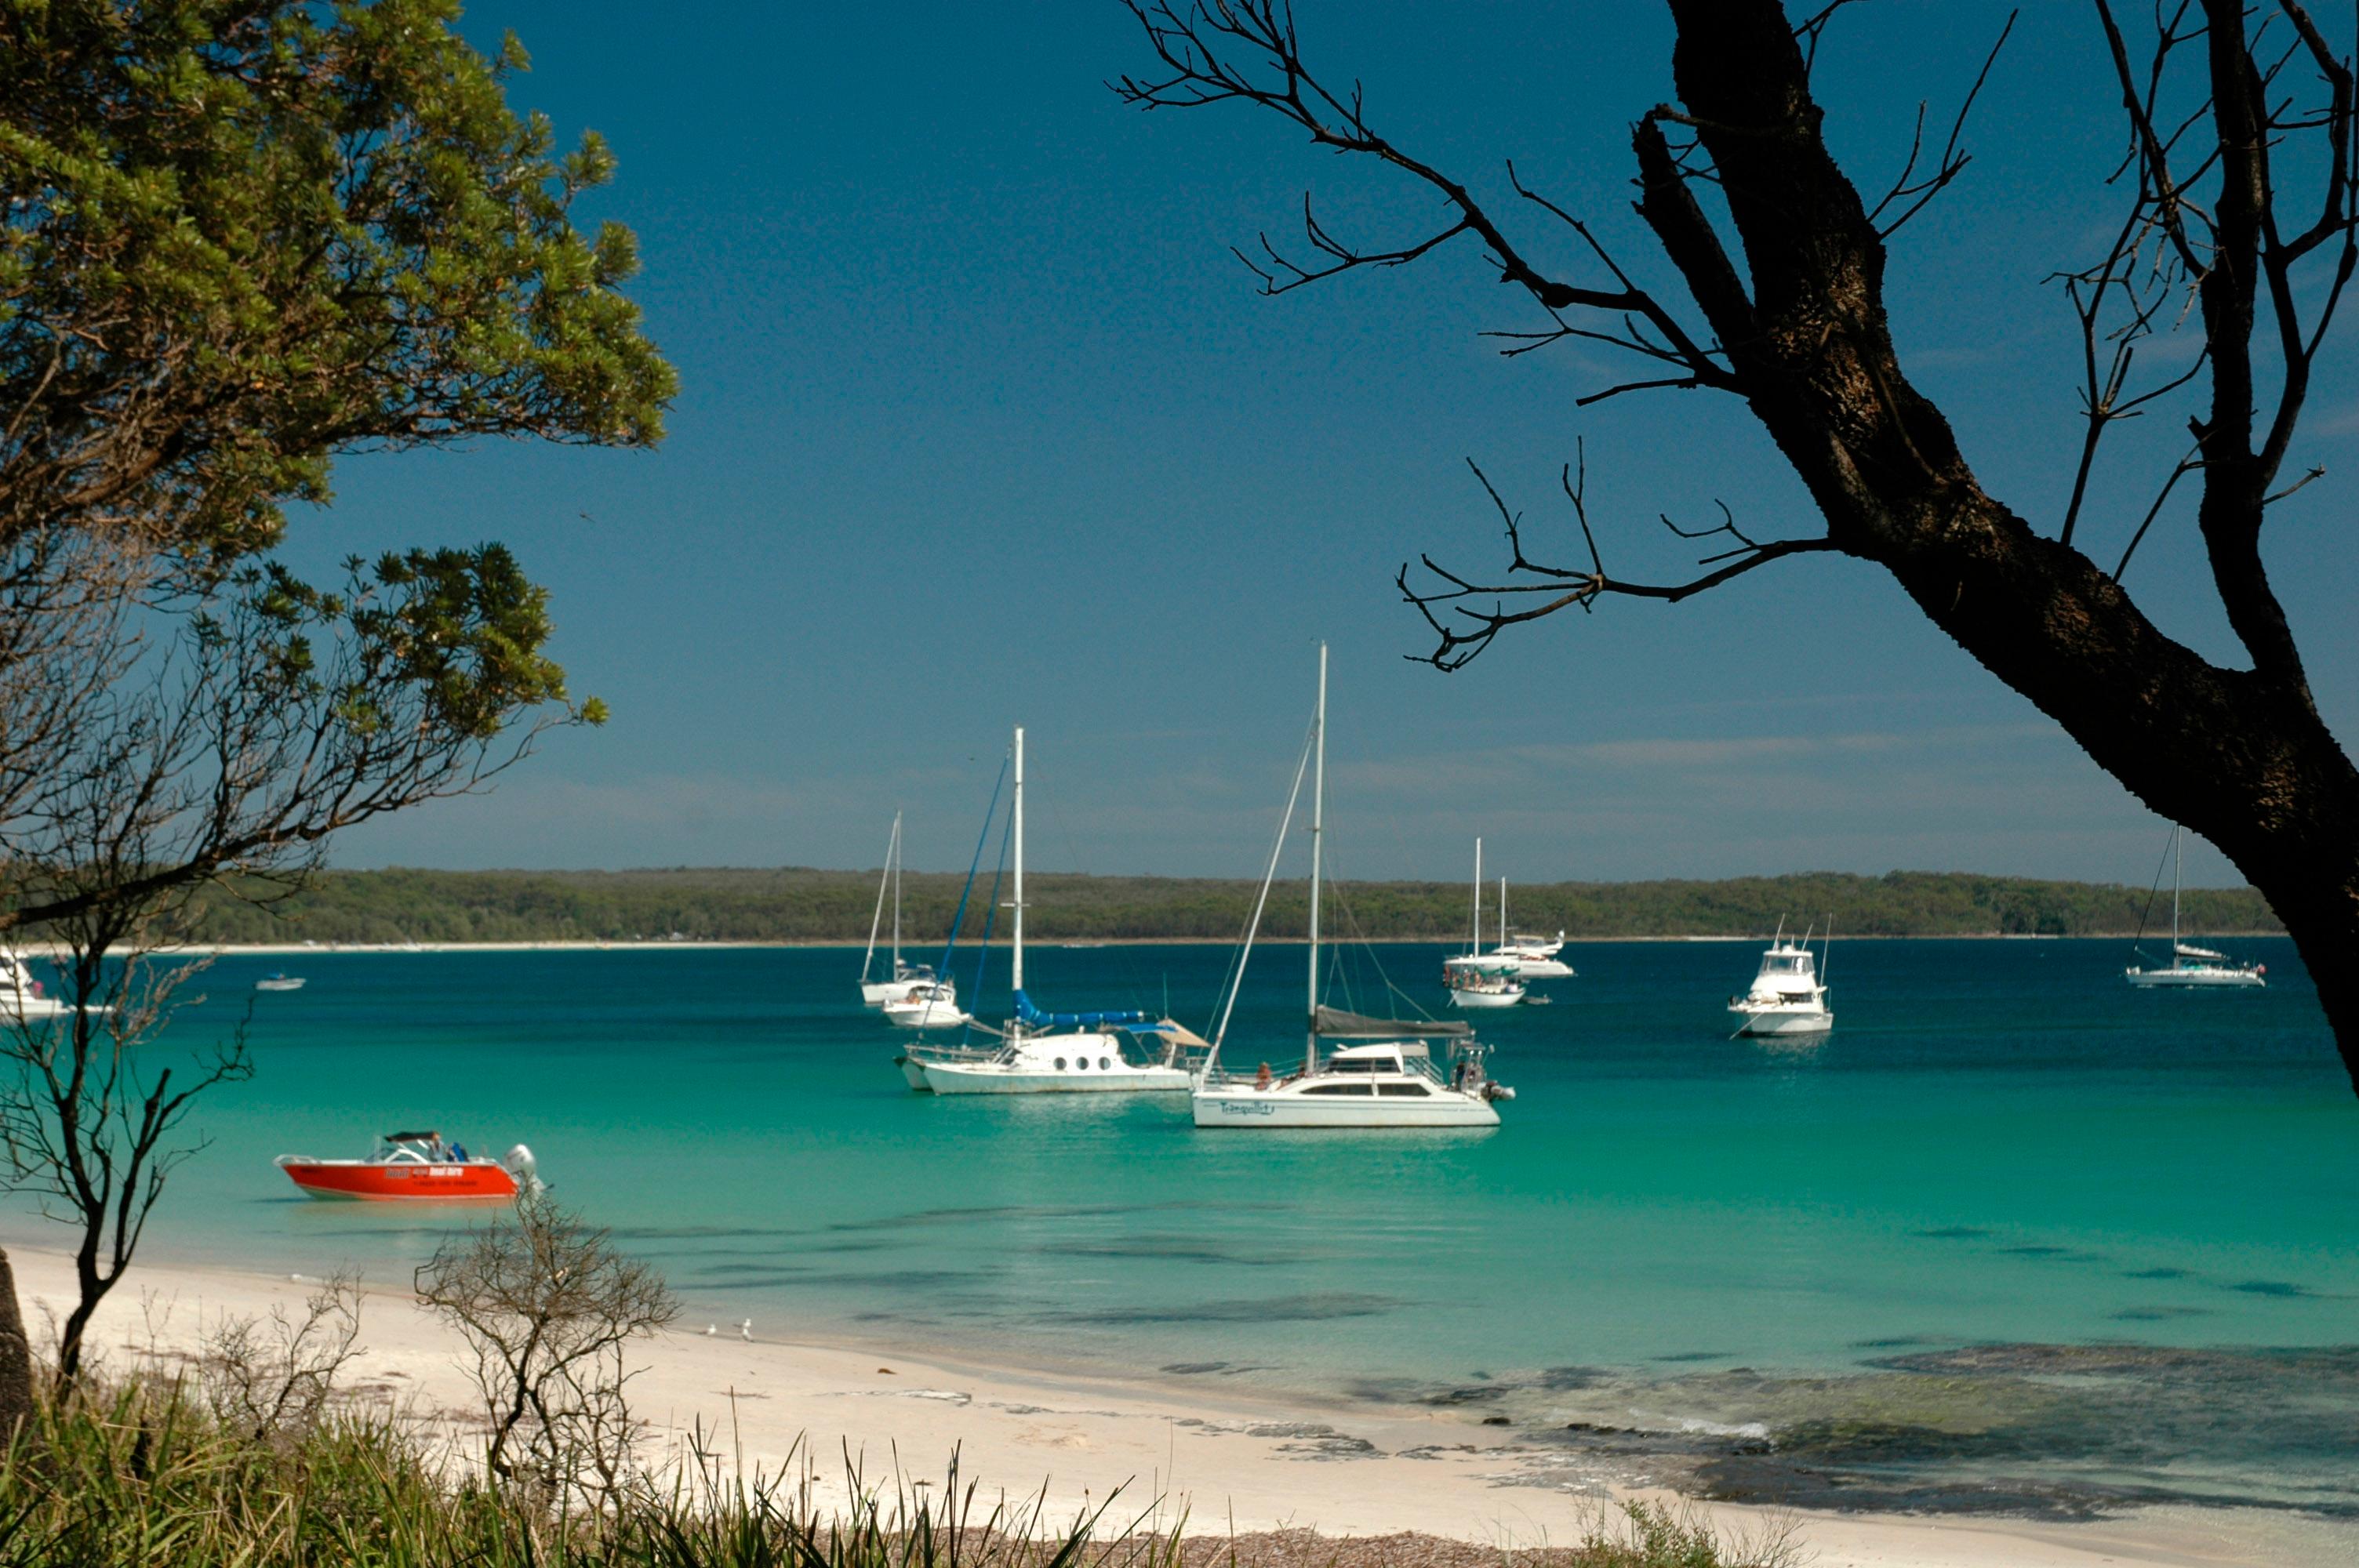 NEWS — New zoning plans for two NSW Marine Parks